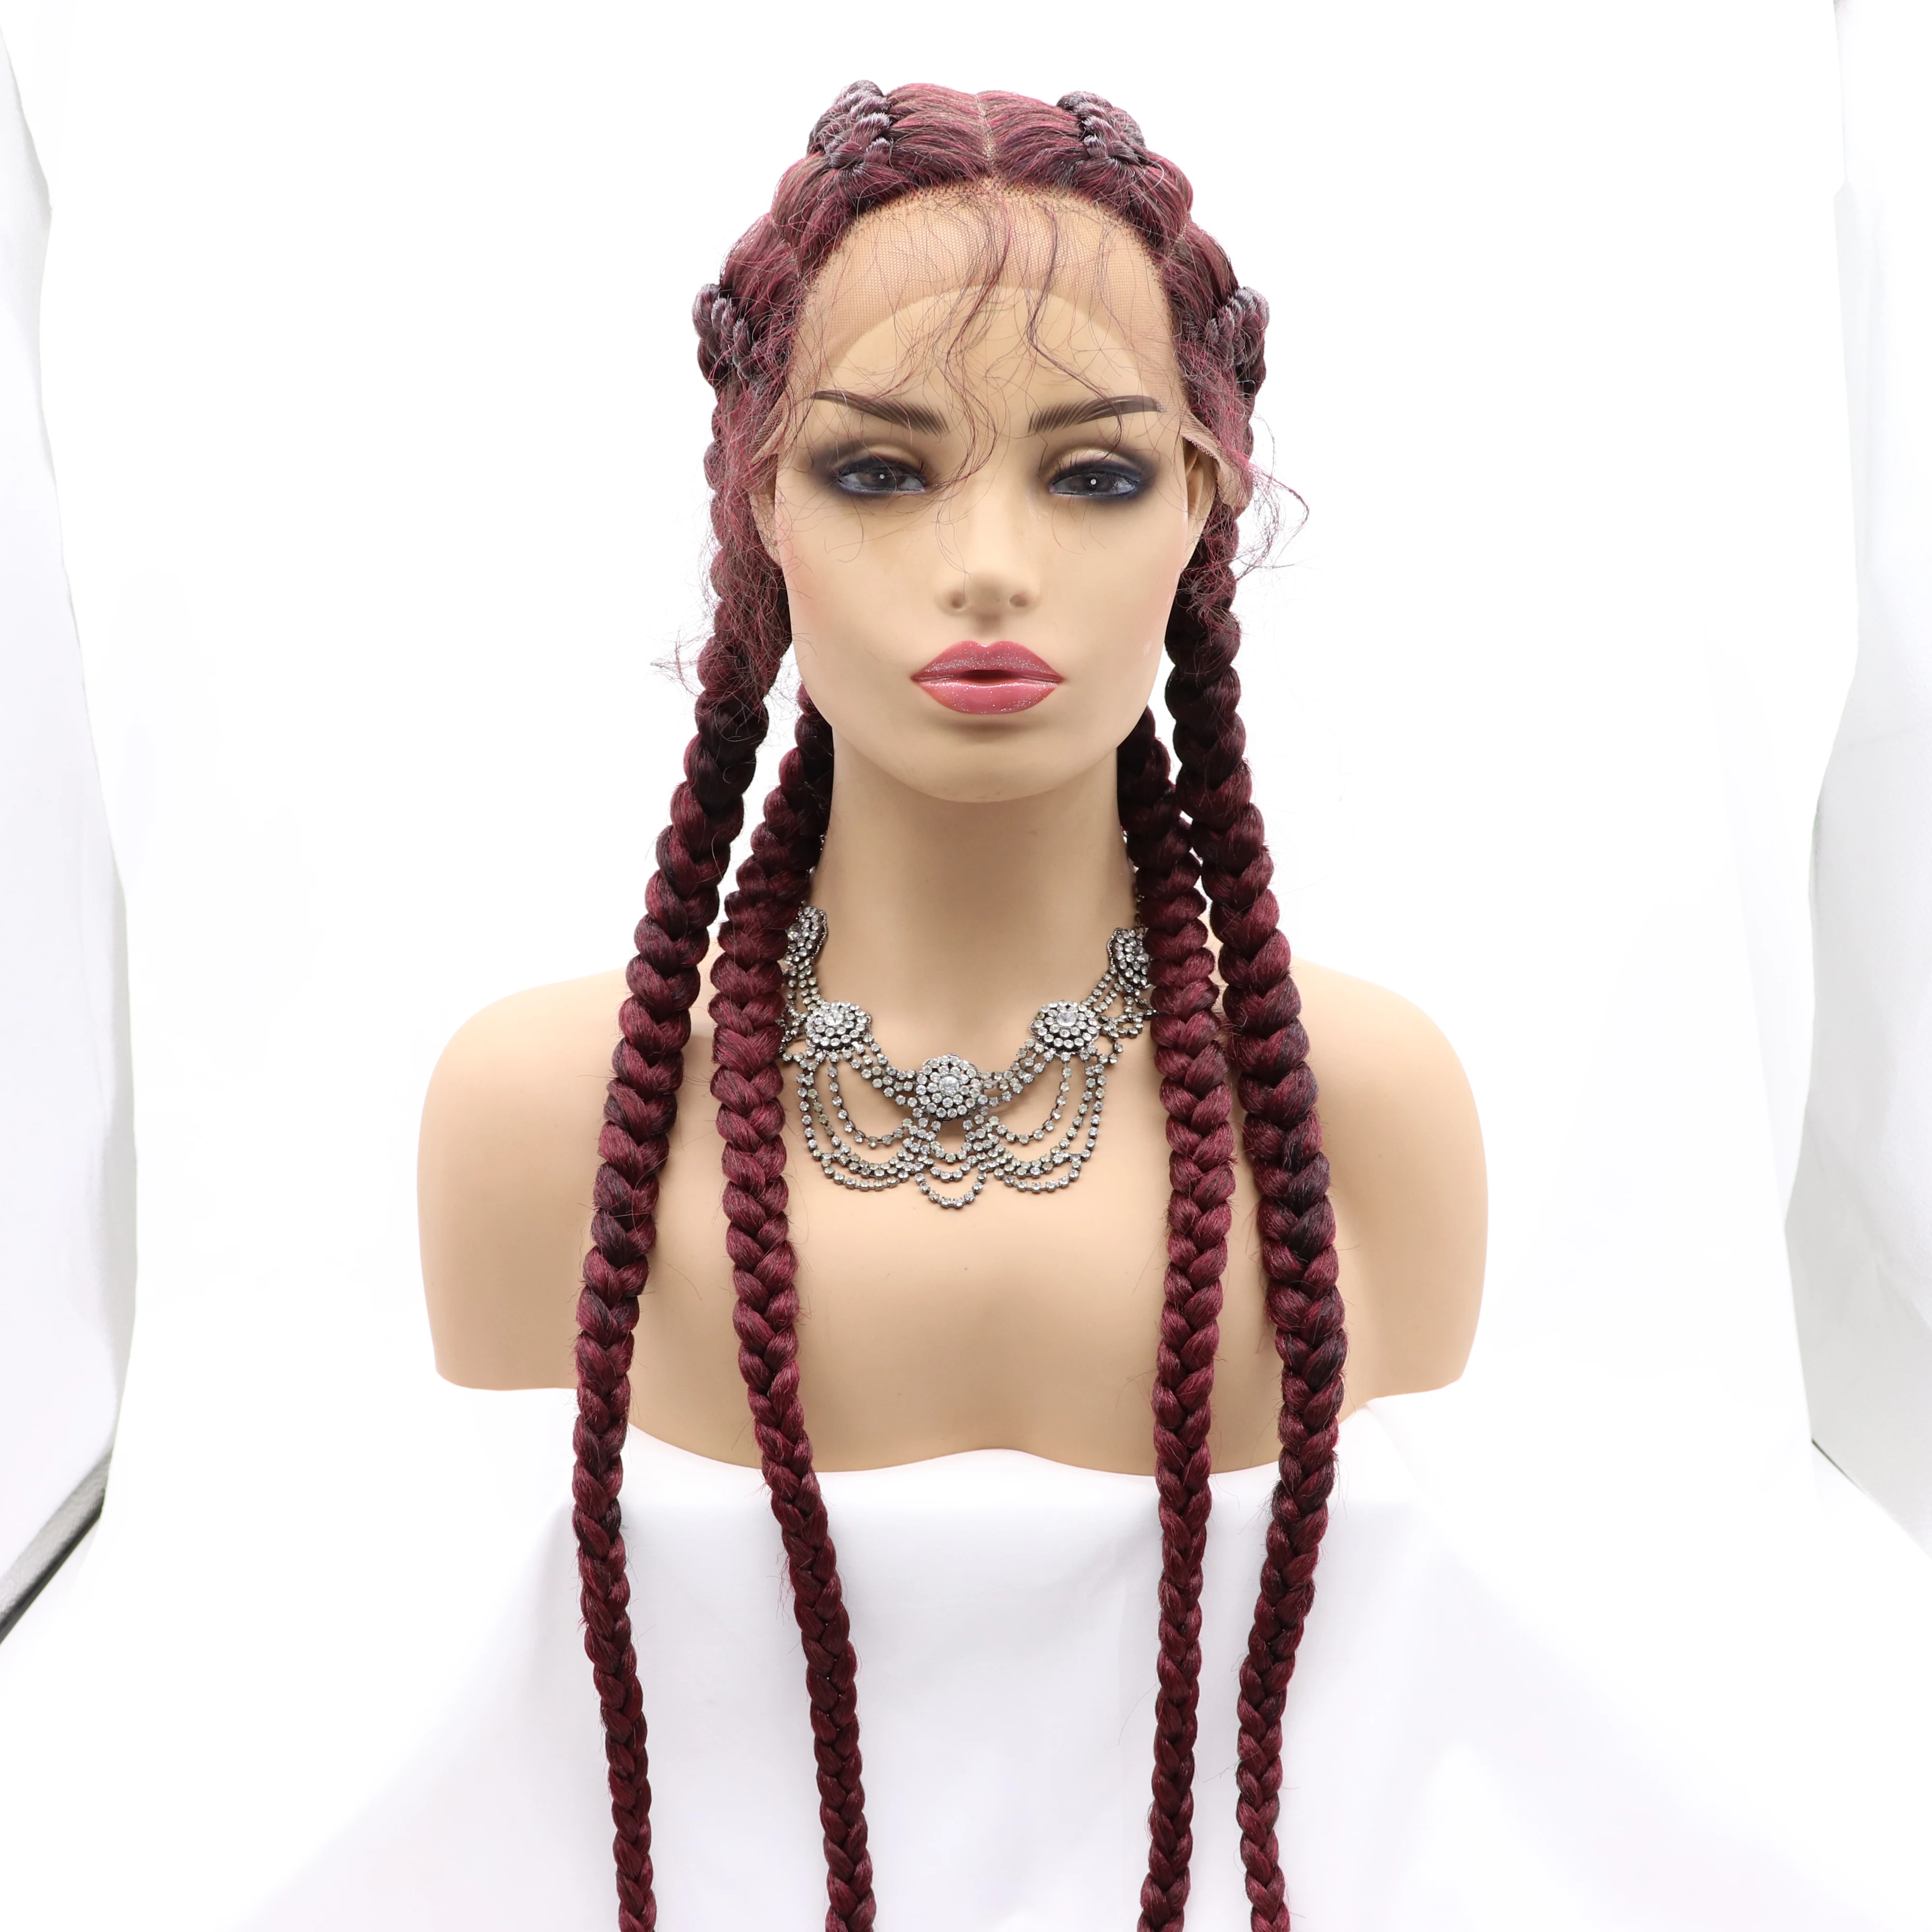 Sylvia 4 Braided Synthetic Lace Front Wigs With Baby Hair Wine Red Heat Resistant for Women Cosplay Drag Queen Wigs